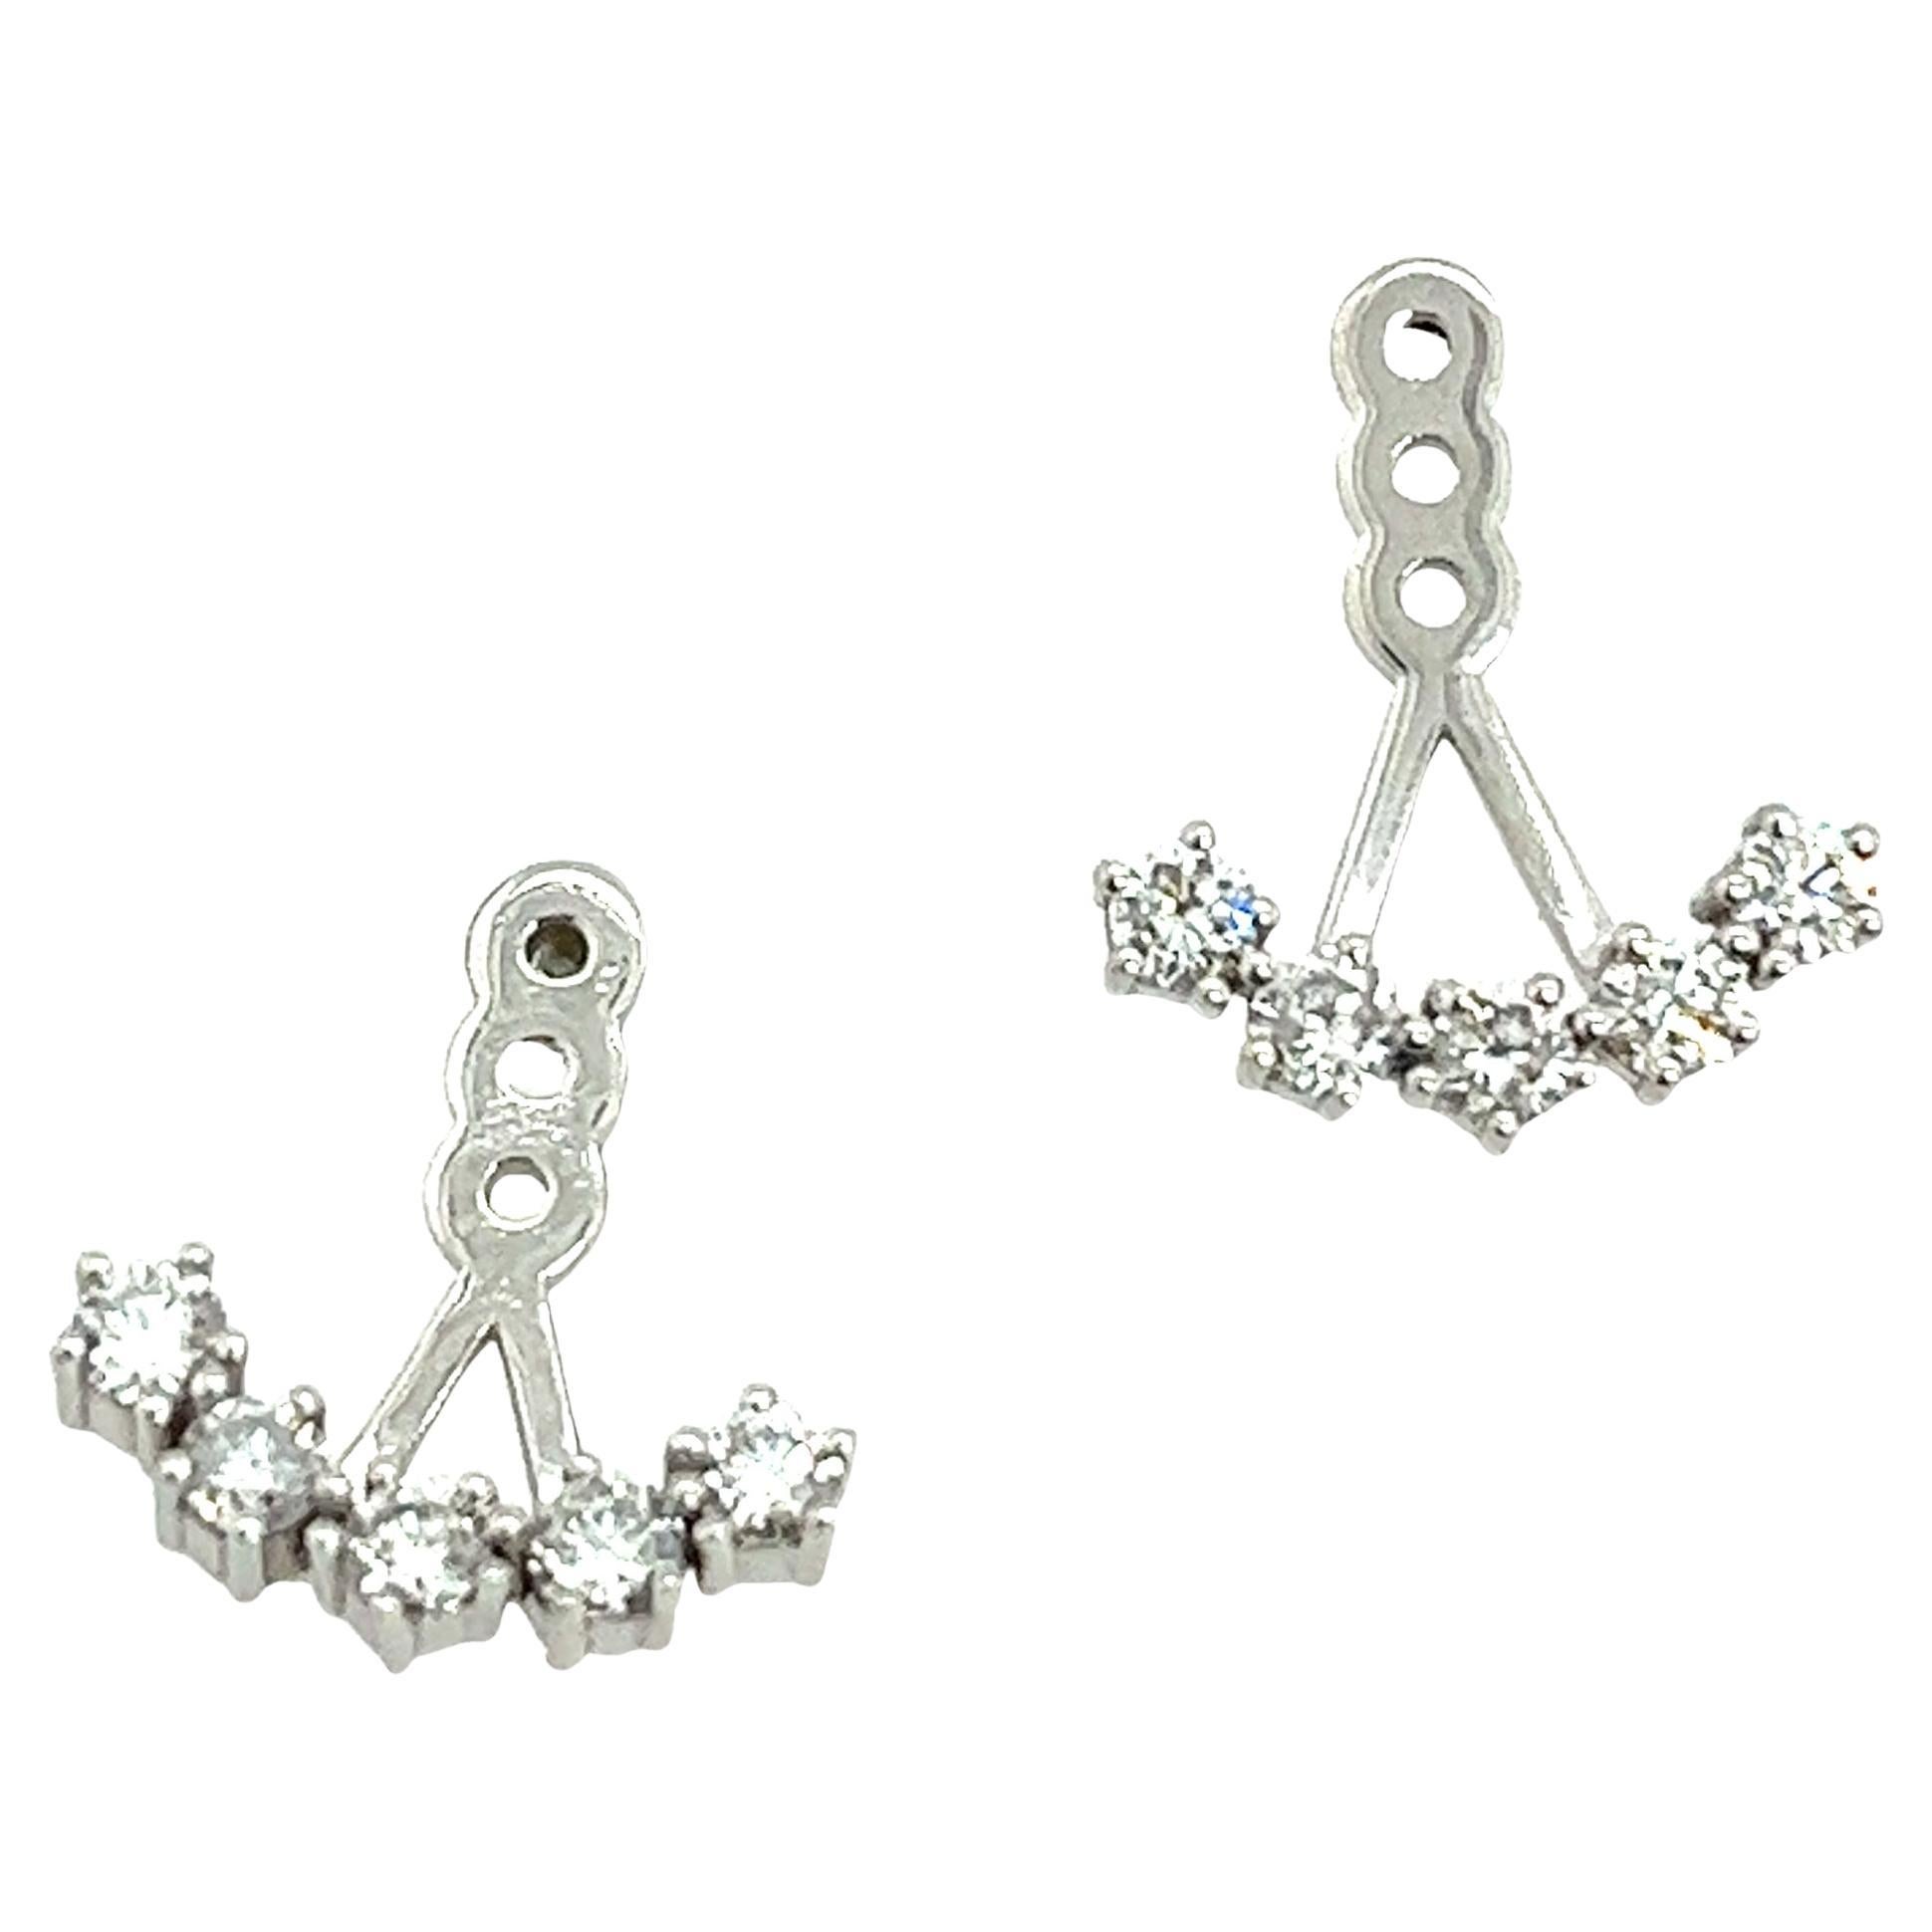 14ct White Gold Earring Jackets fit Behind any Stud Earring, set with 0.40ct of  For Sale